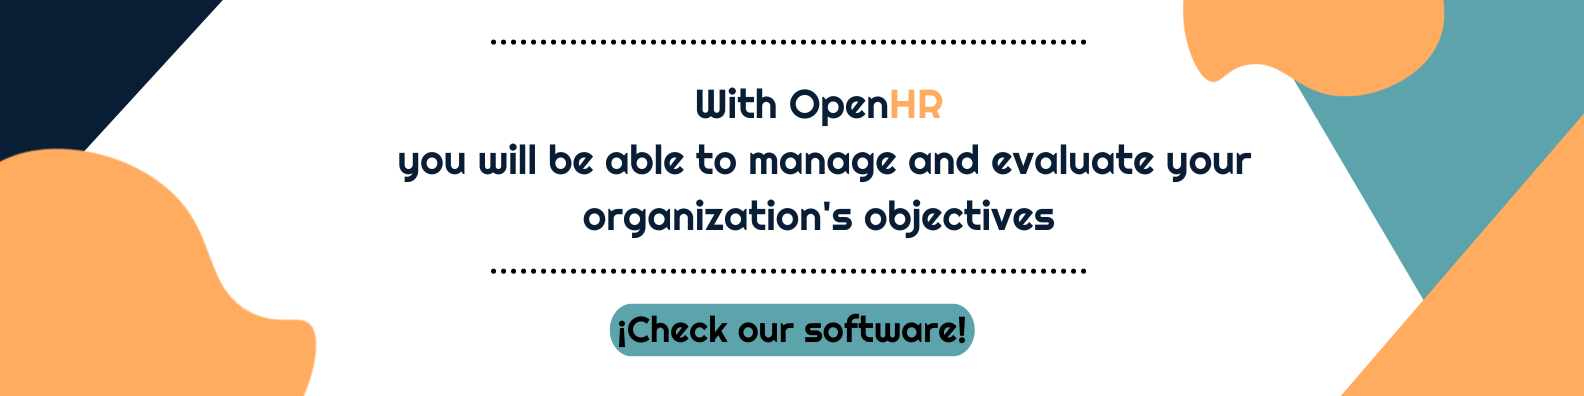 OpenHR Perfomance Software